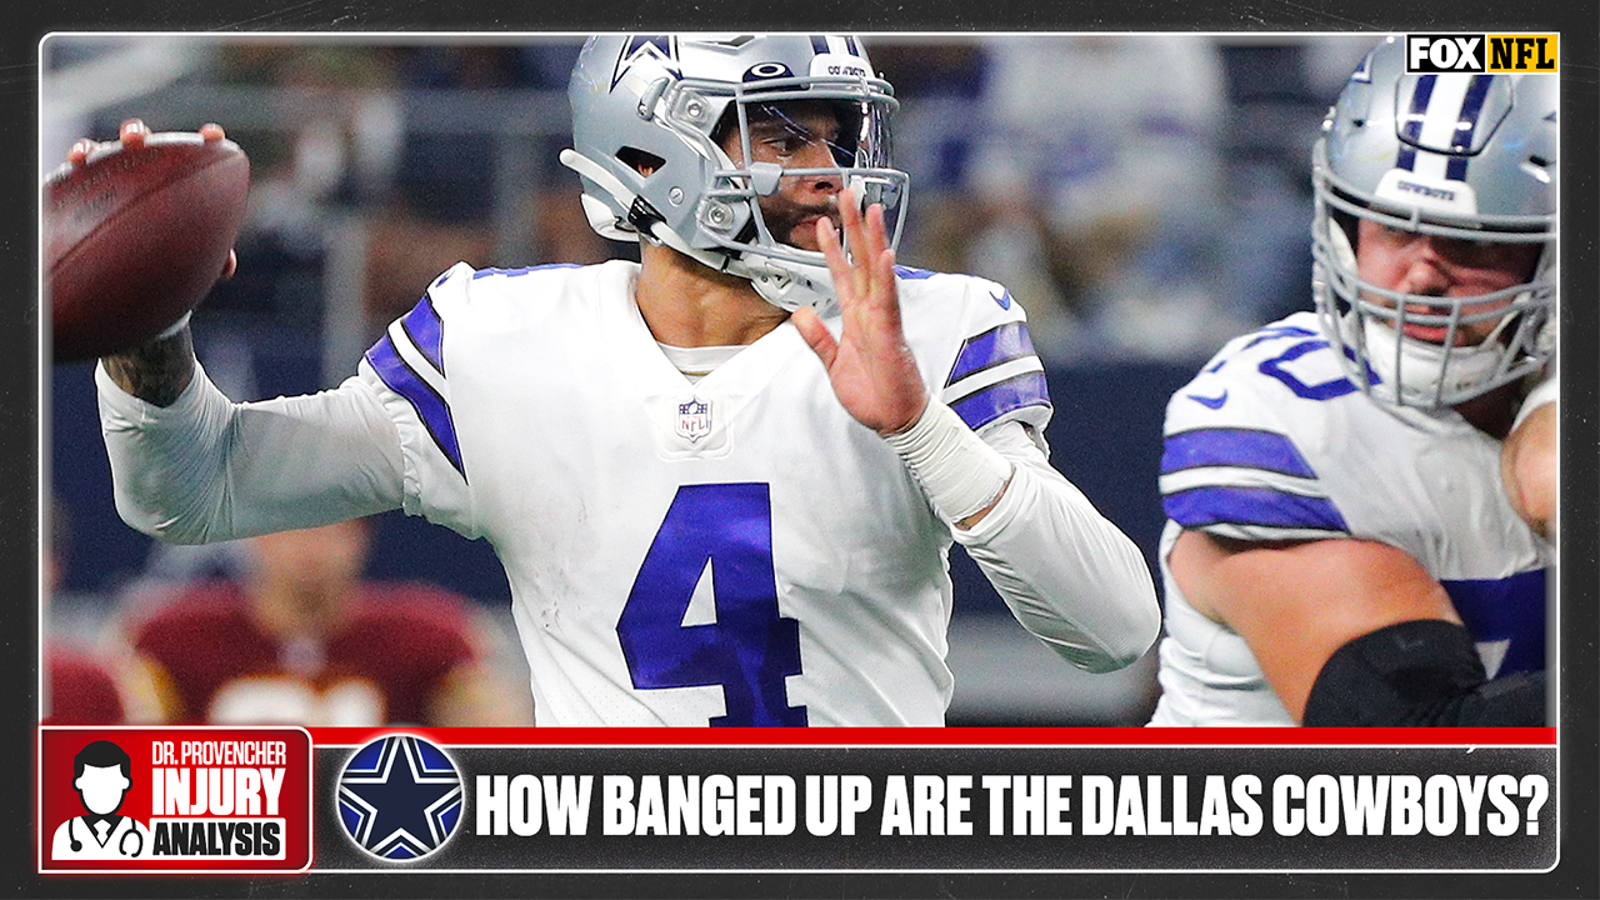 How banged up are the Cowboys?